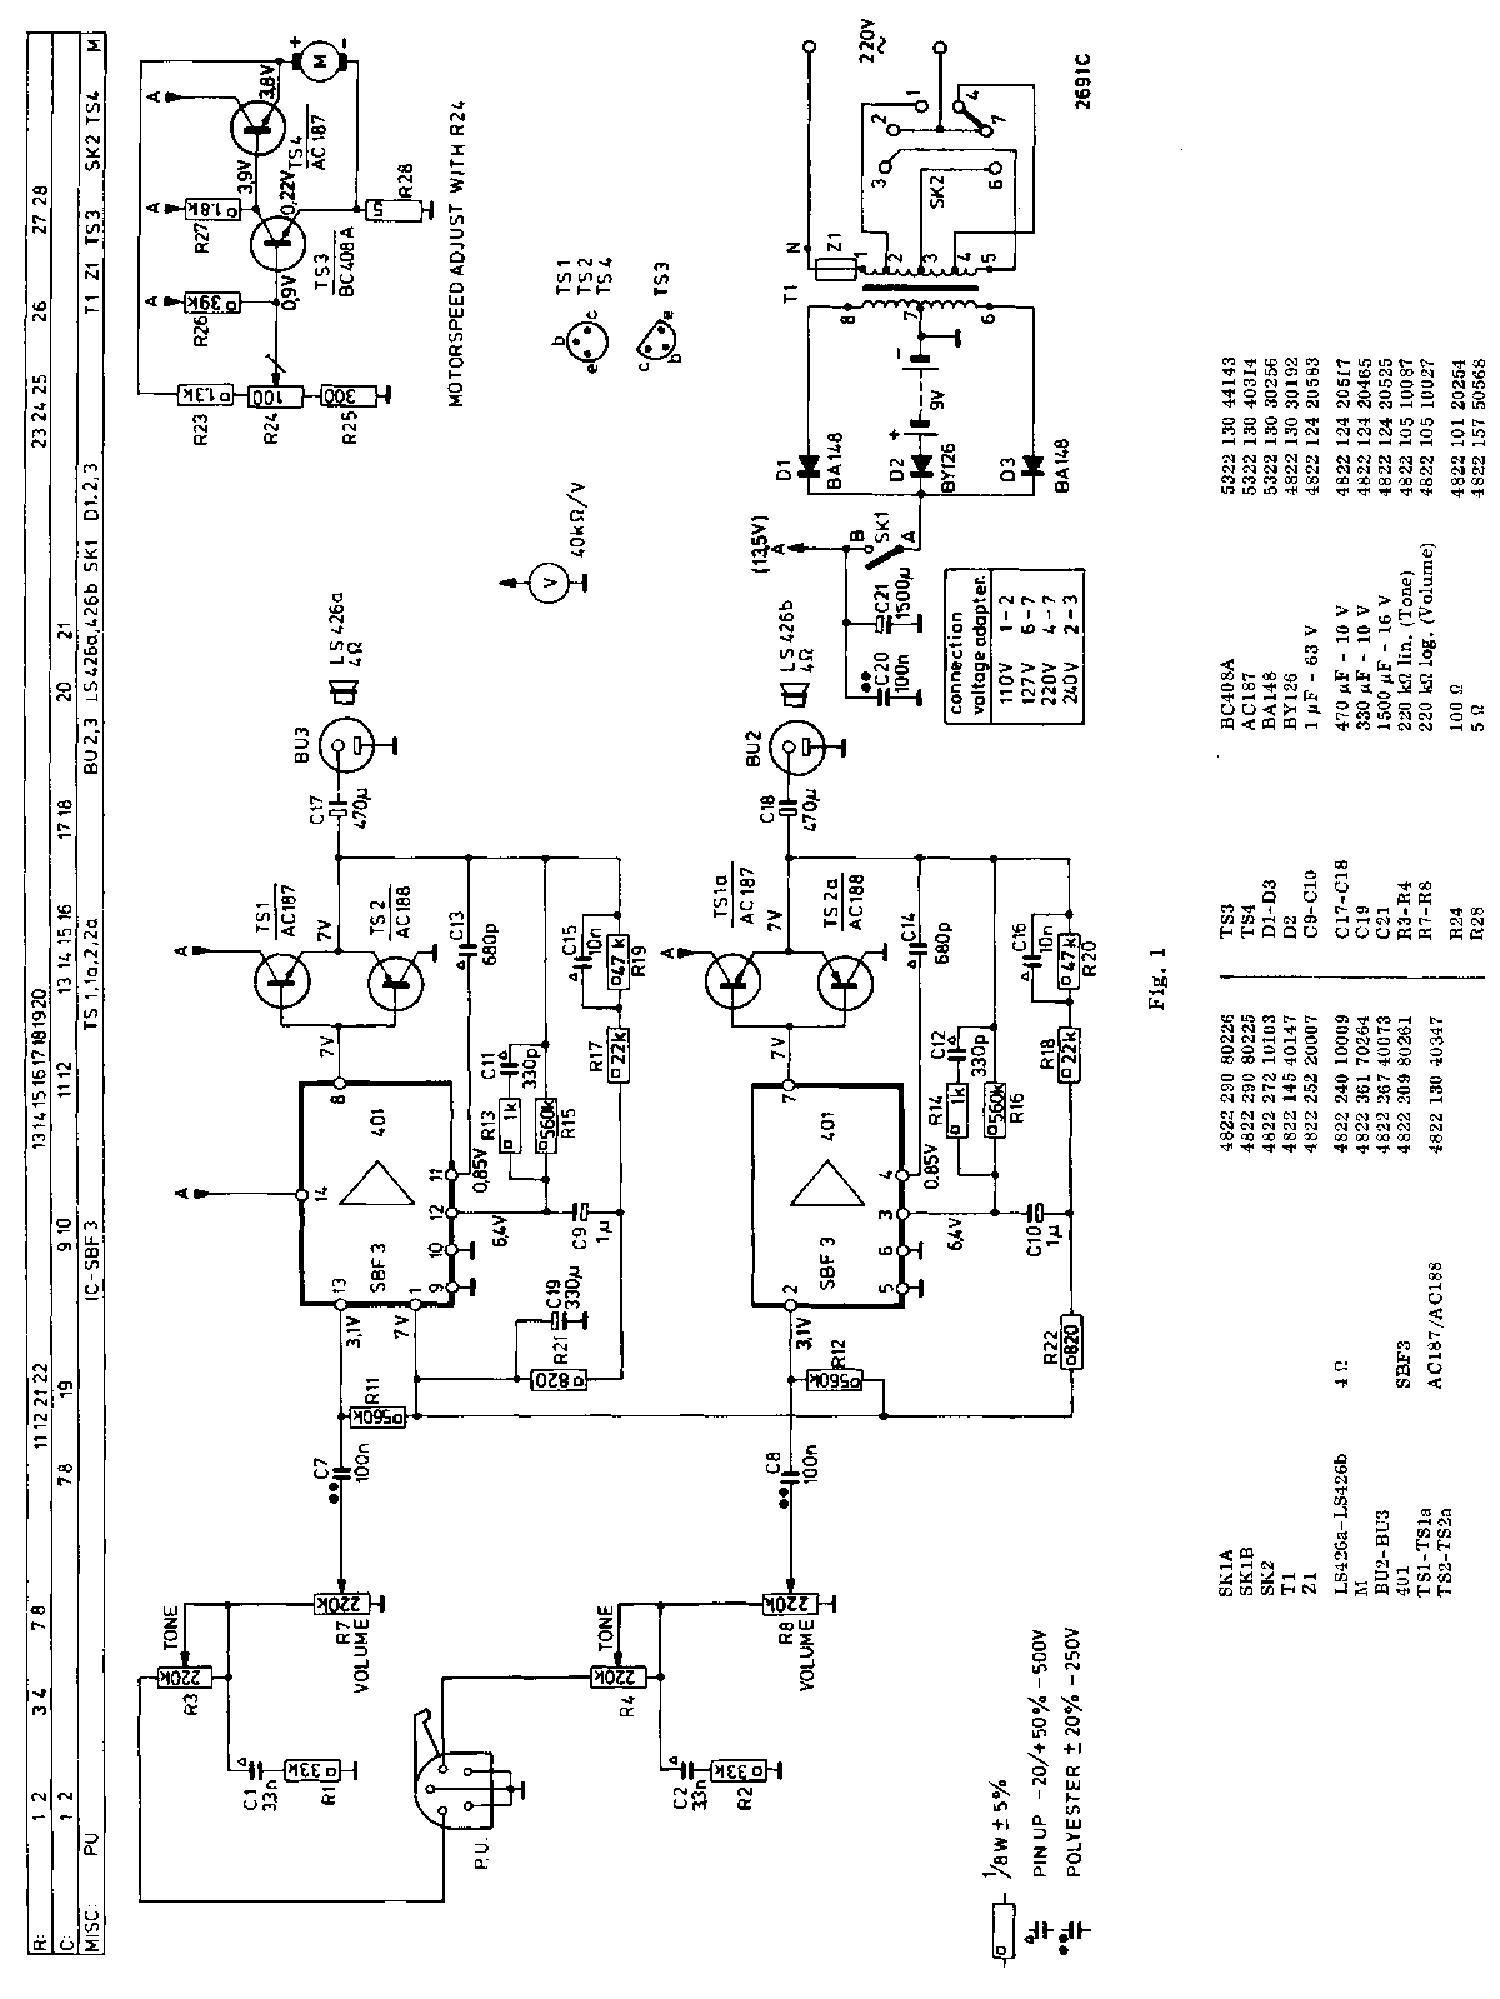 PHILIPS 22GF603 SM service manual (2nd page)